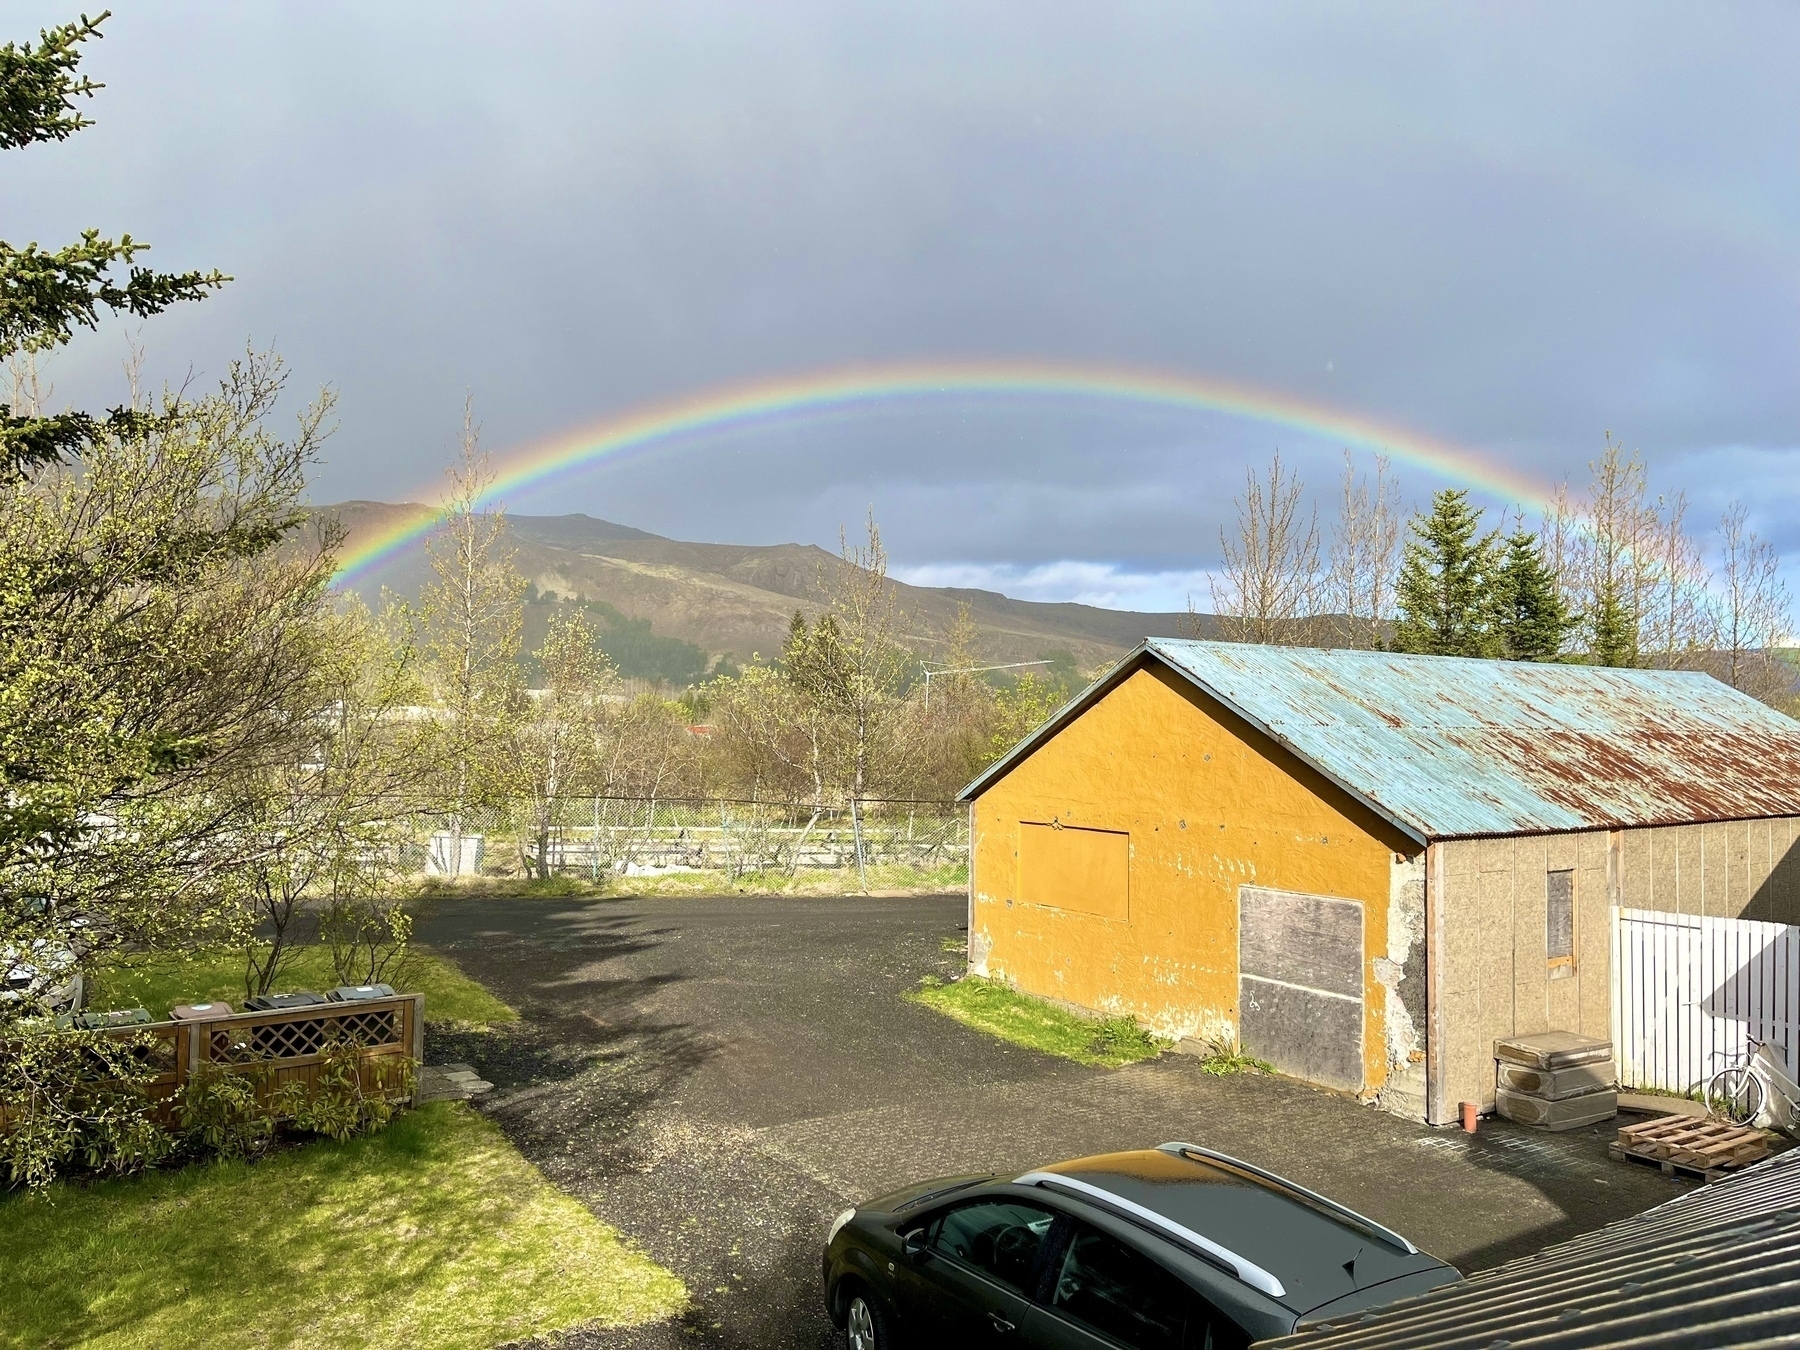 A rainbow over a commercial garden in the background. In the foreground there is a small old dilapidated warehouse that has seen better days.